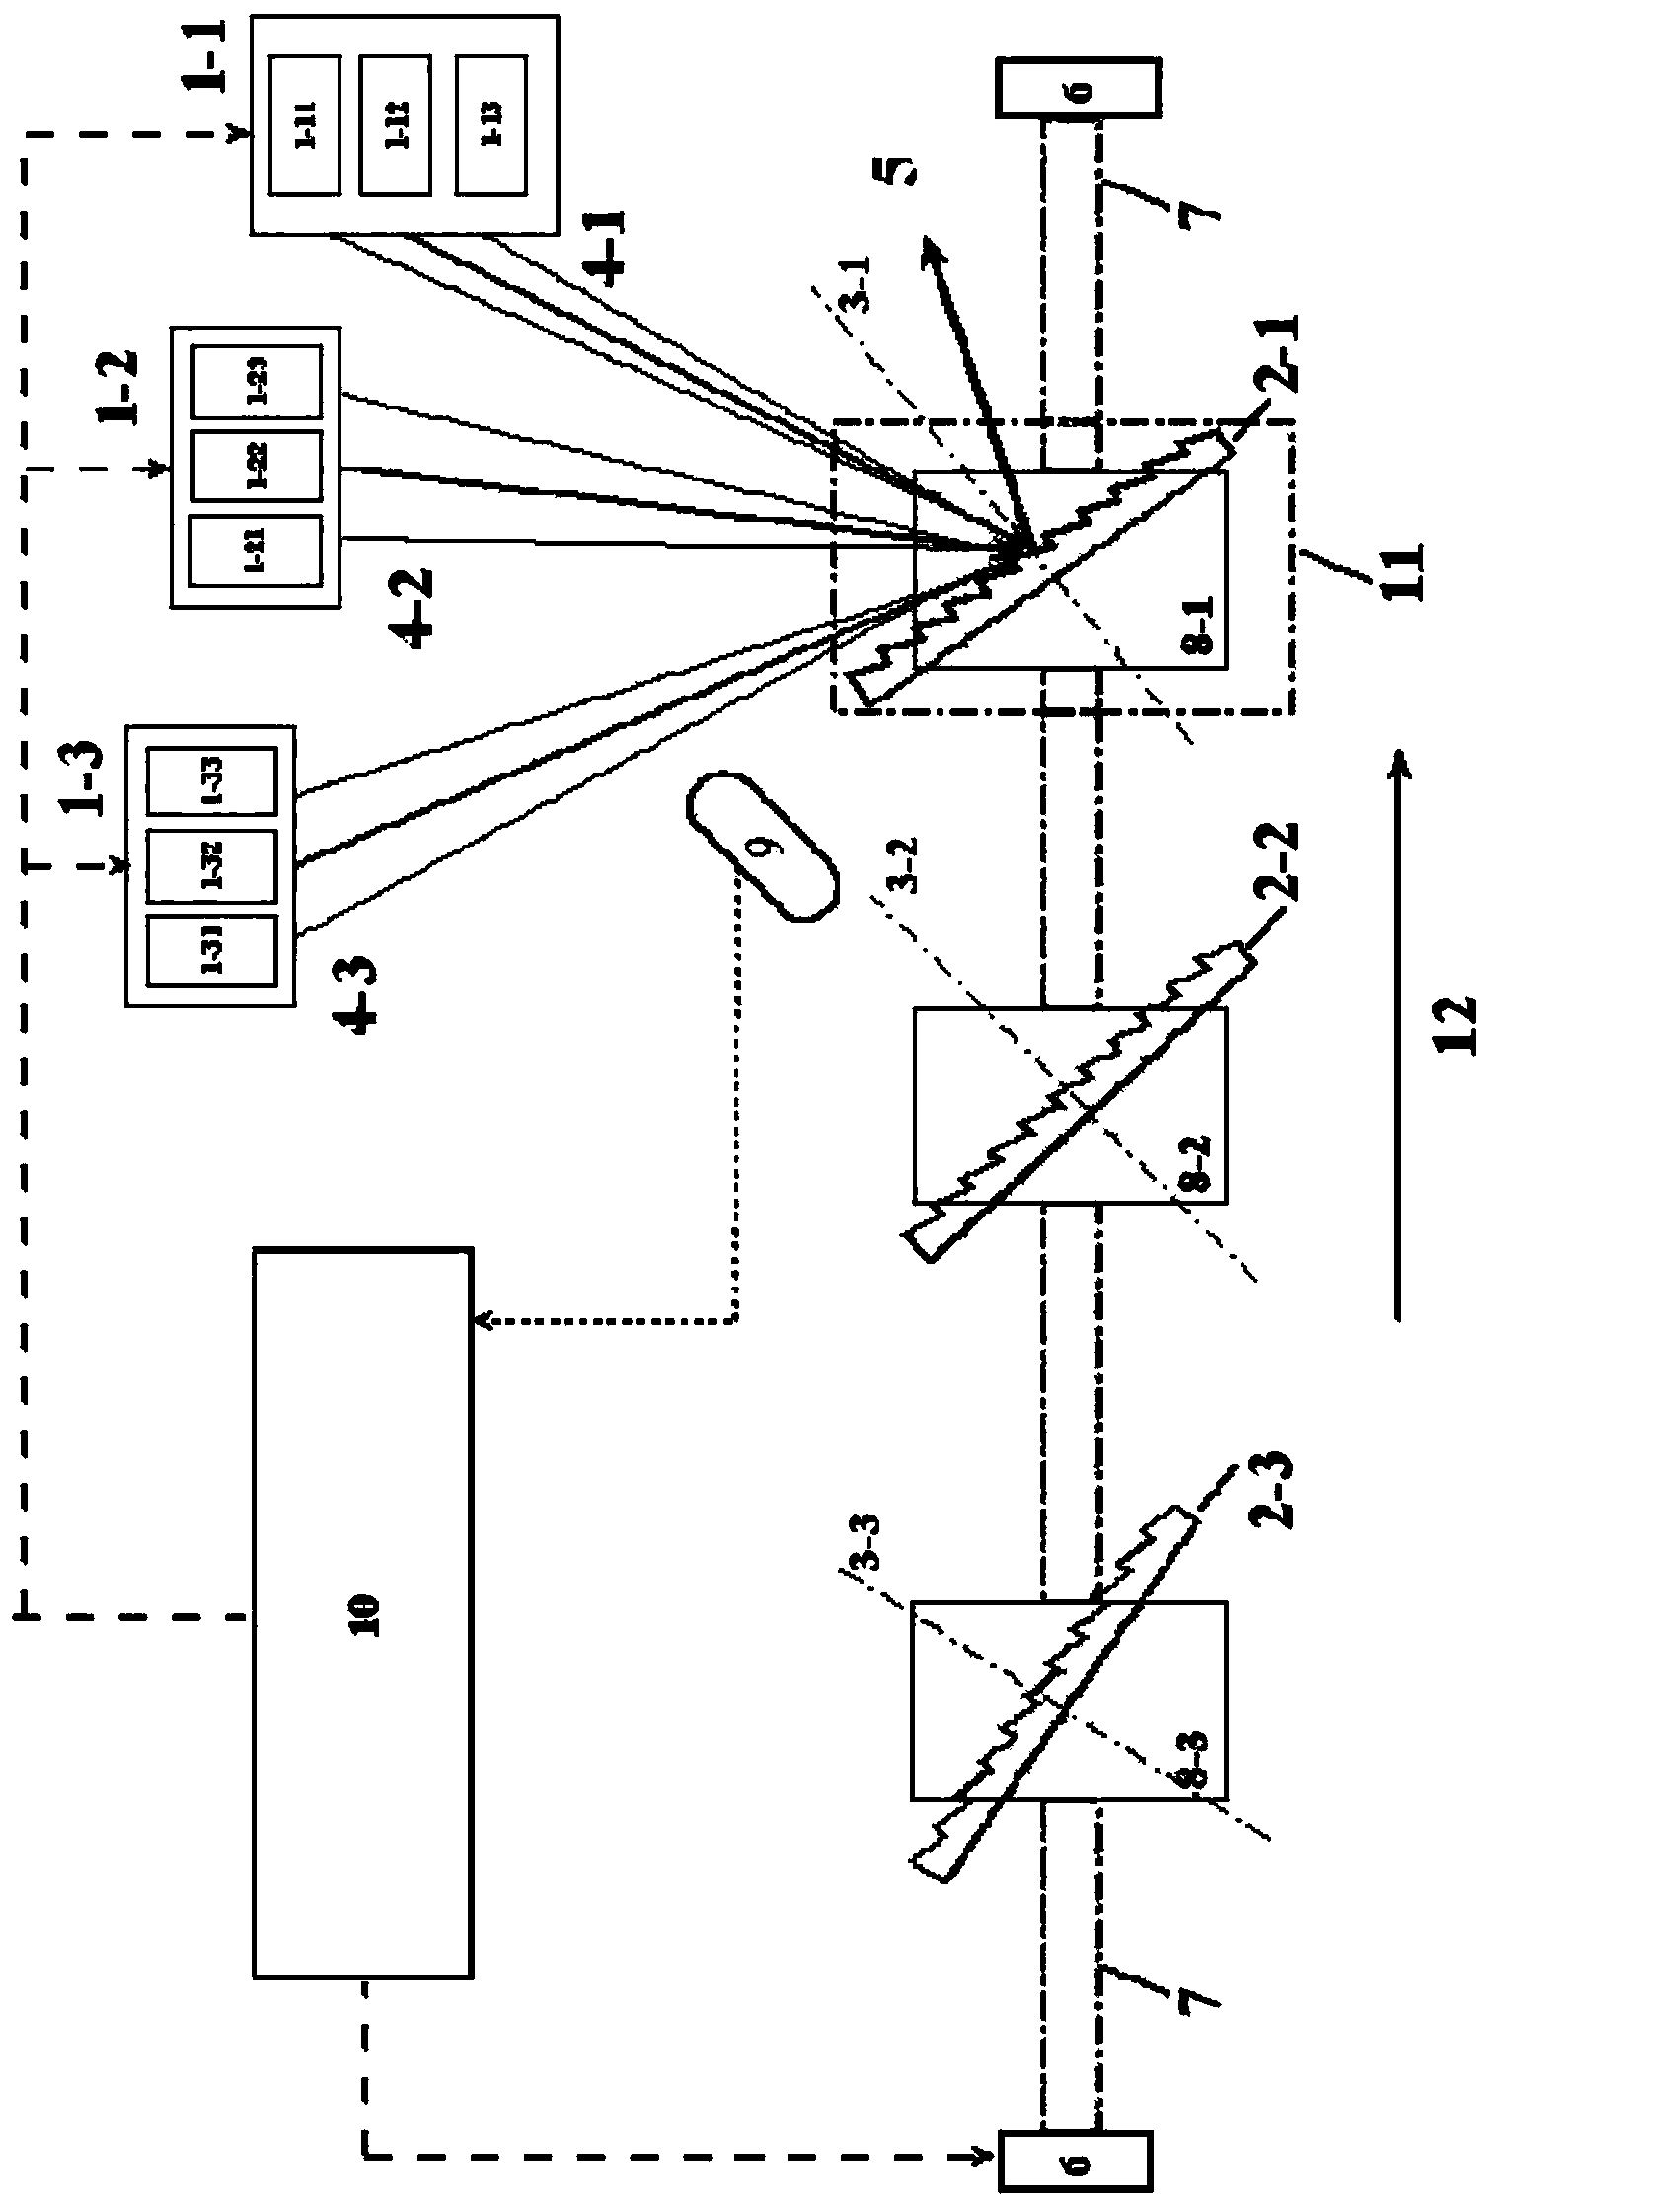 Laser beam pulse time sequence synthesizer based on diffraction gratings